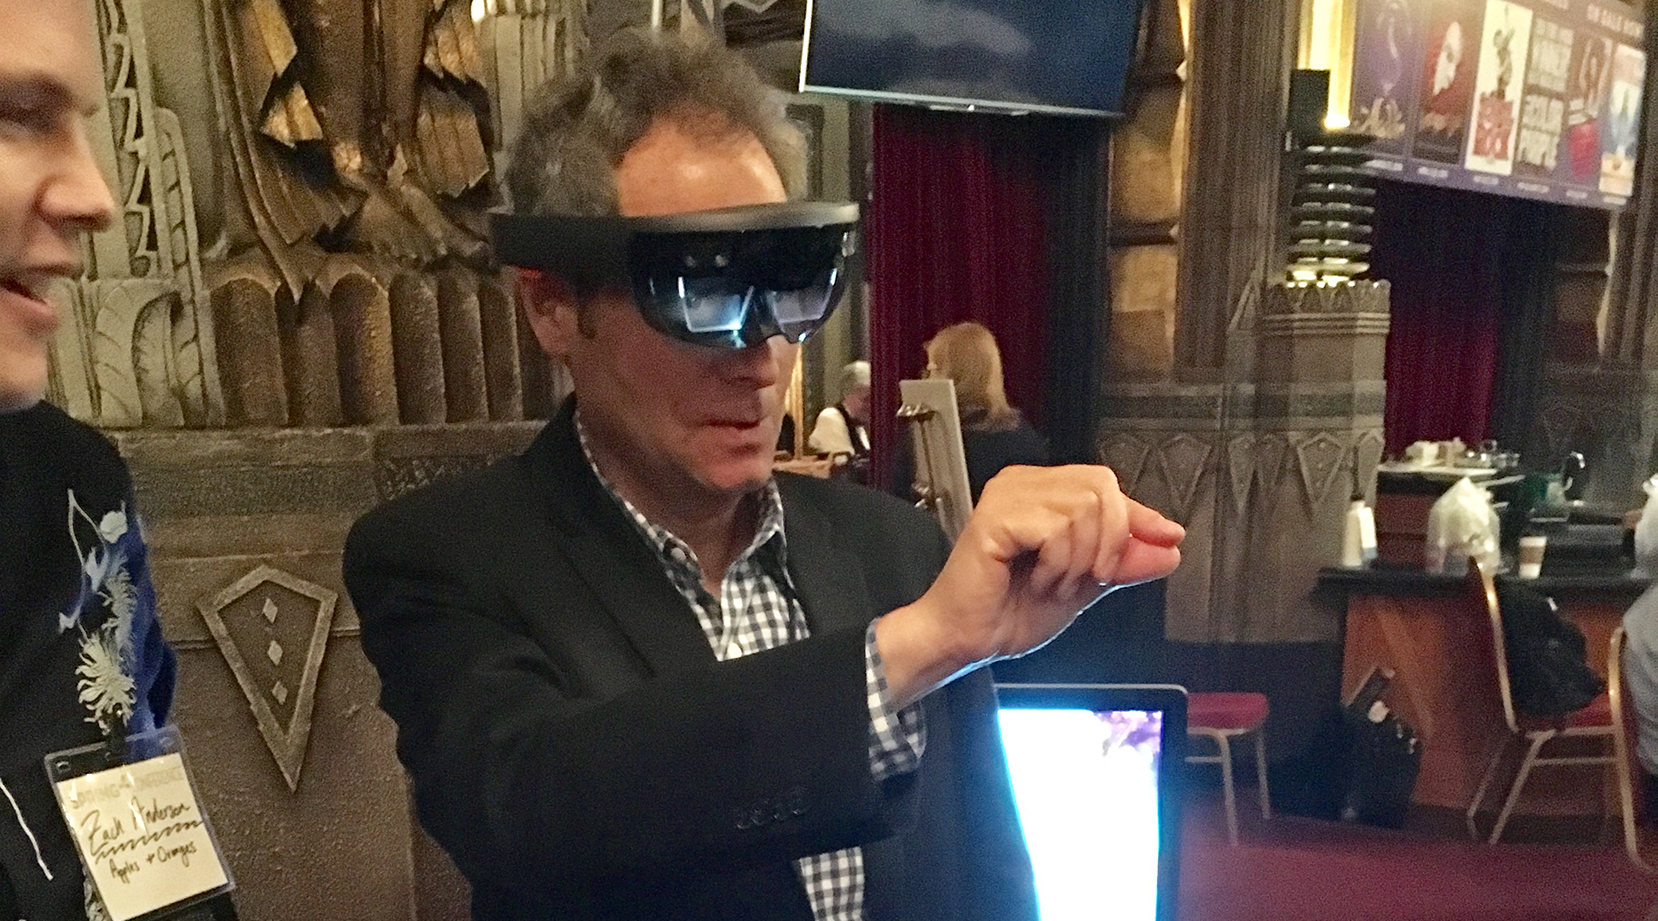 Member Van Kaplan tries out a virtual reality tool offered by sponsor Apples and Oranges Arts.